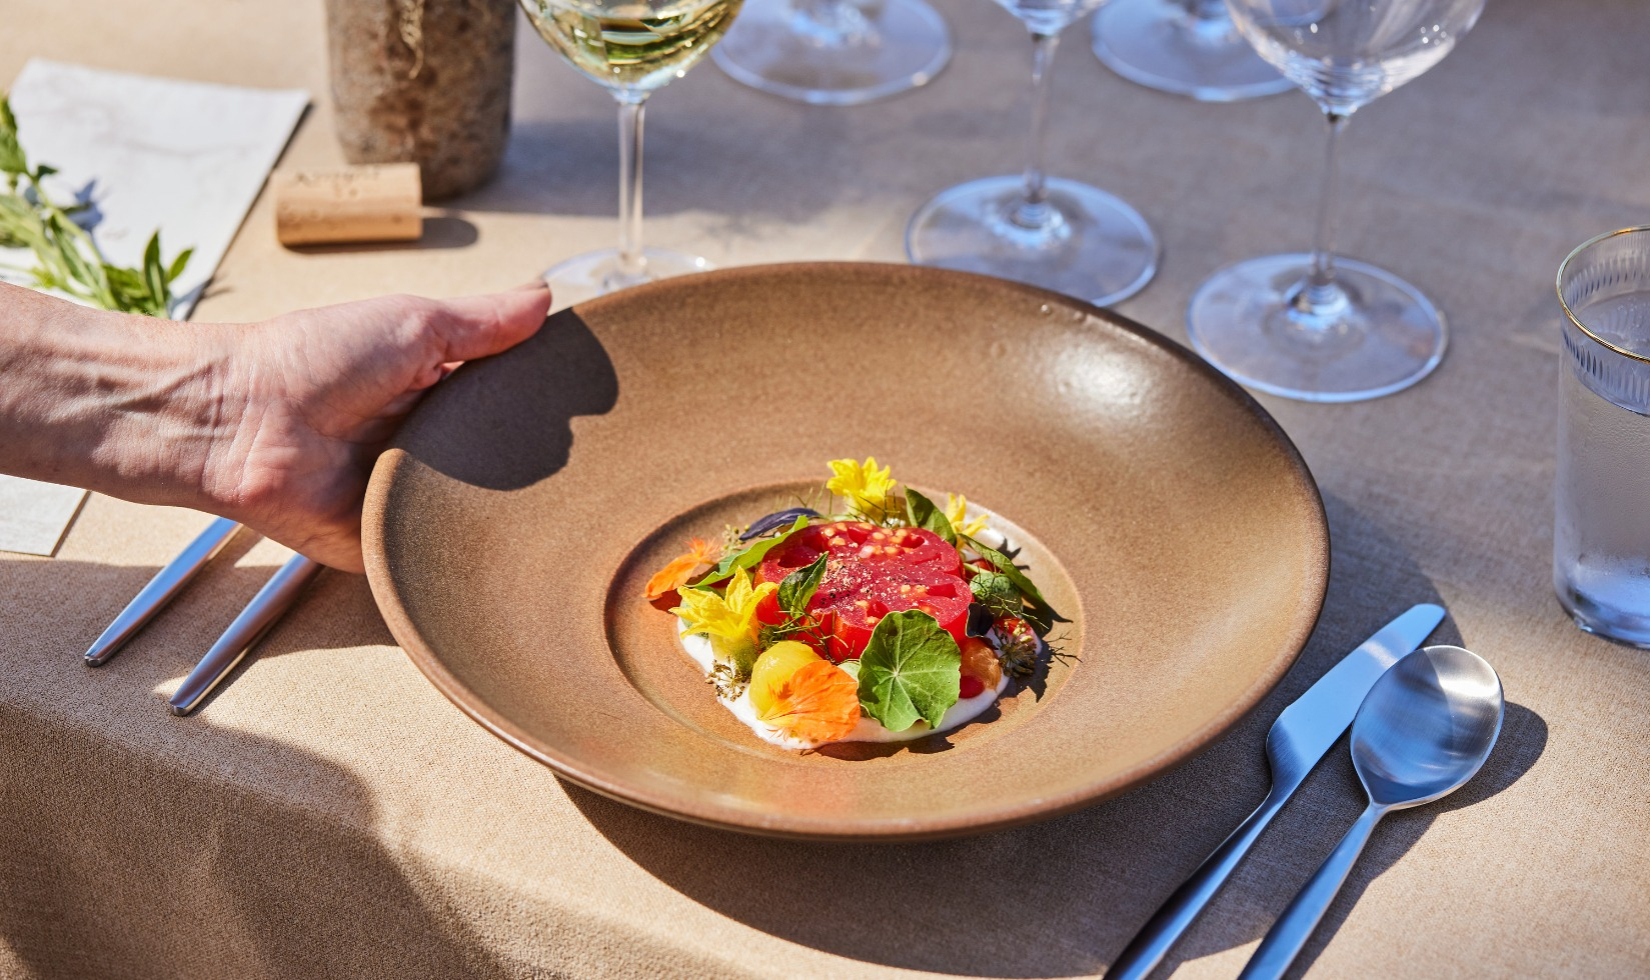 Elegantly presented dish served on a ceramic dish served on outdoor terrace table